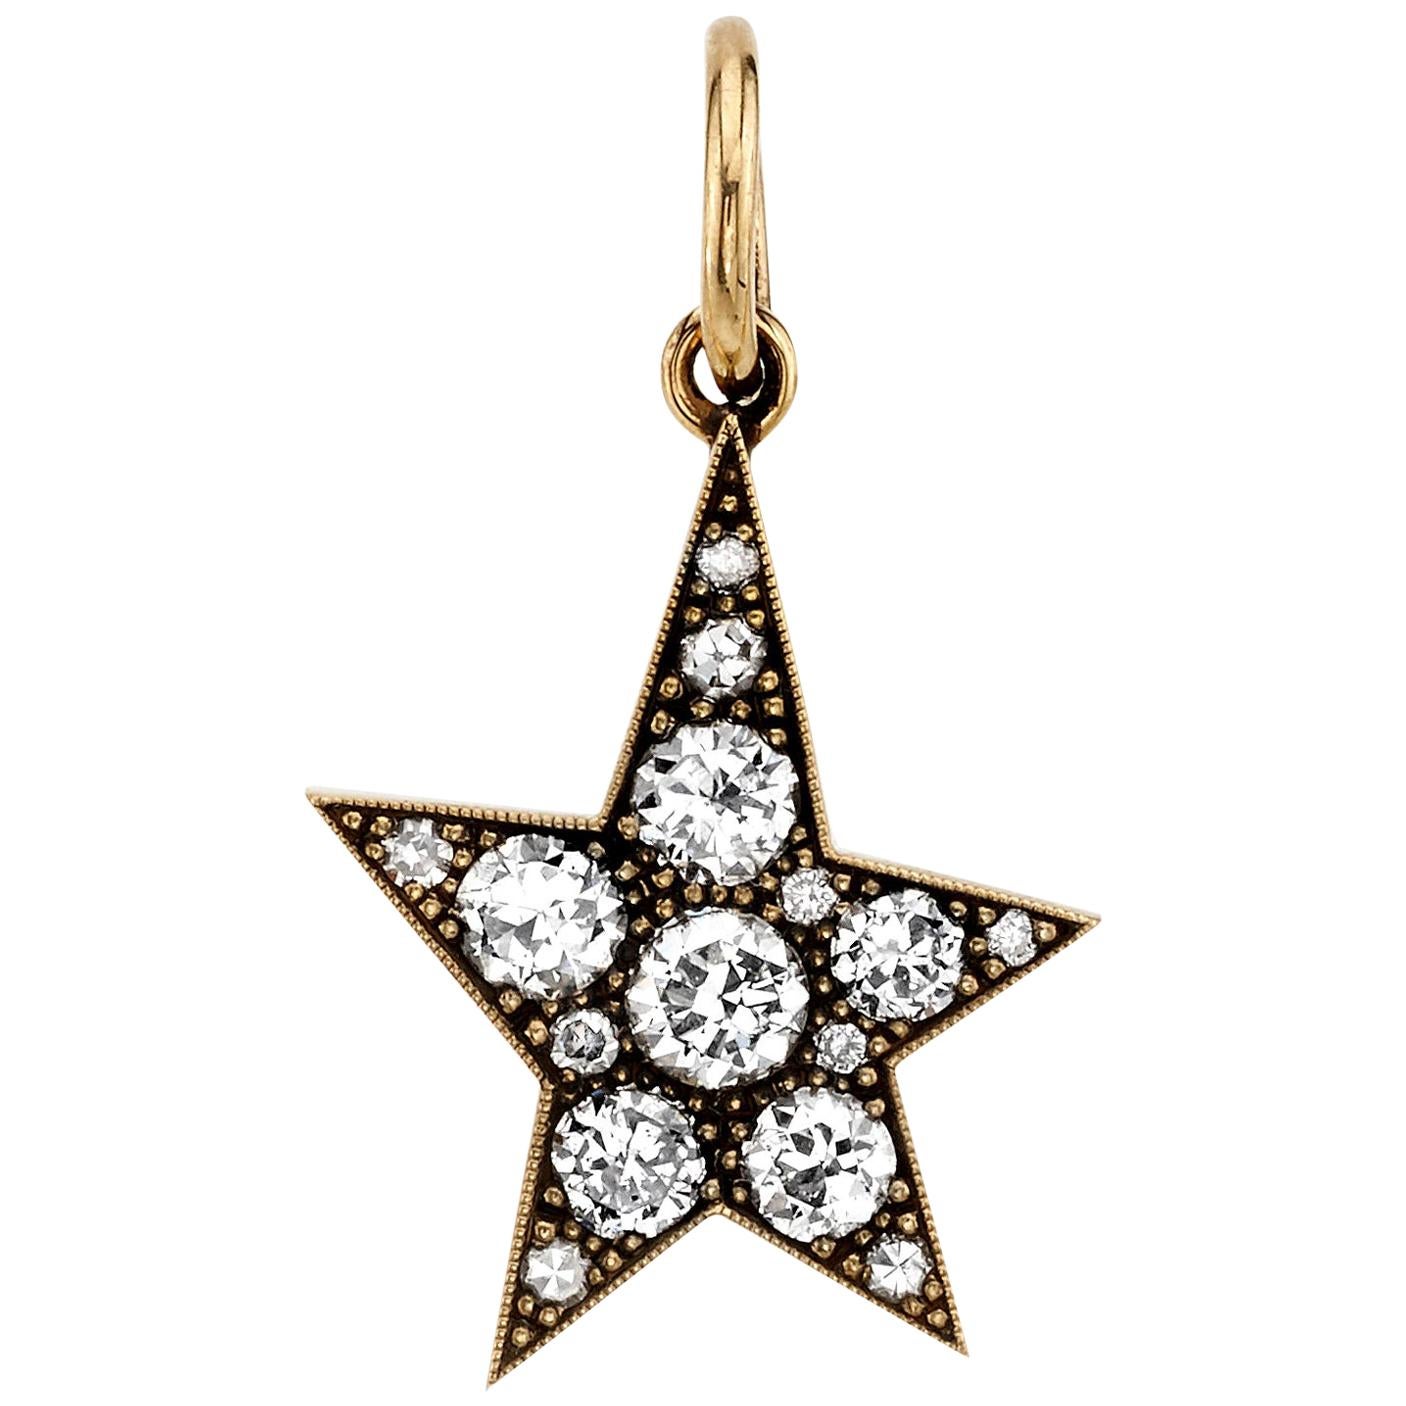 Approximately 0.90ctw varying old cut and round brilliant cut diamonds in a handcrafted 18K yellow gold pendant. Available in an oxidized or polished finish, please specify when ordering. Charm measures 16mm x 23mm.

Price may vary according to